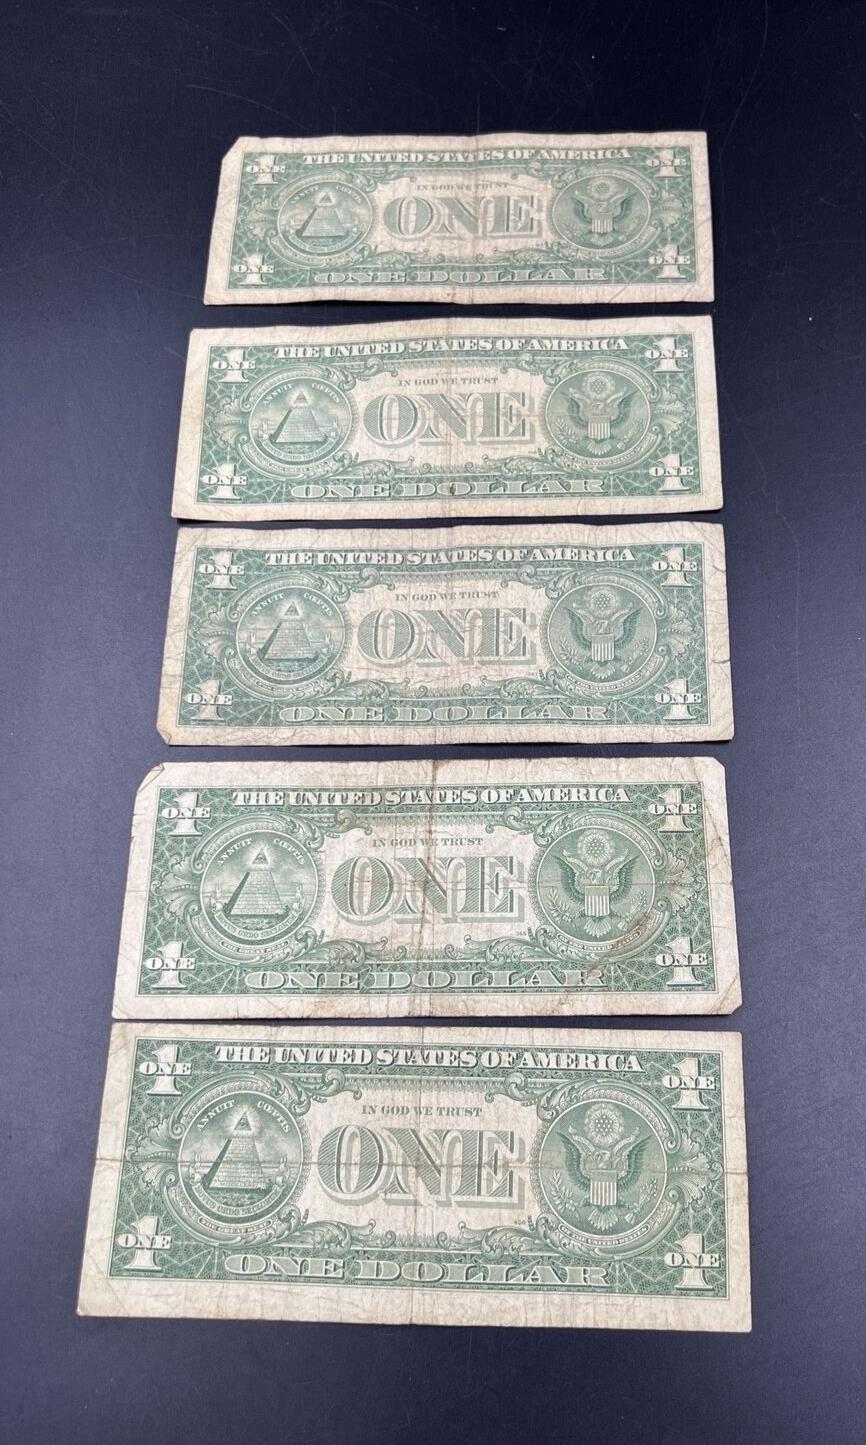 Lot of 5 1957 Silver Certificate Bill Currency Note Bills VG Circulated #133